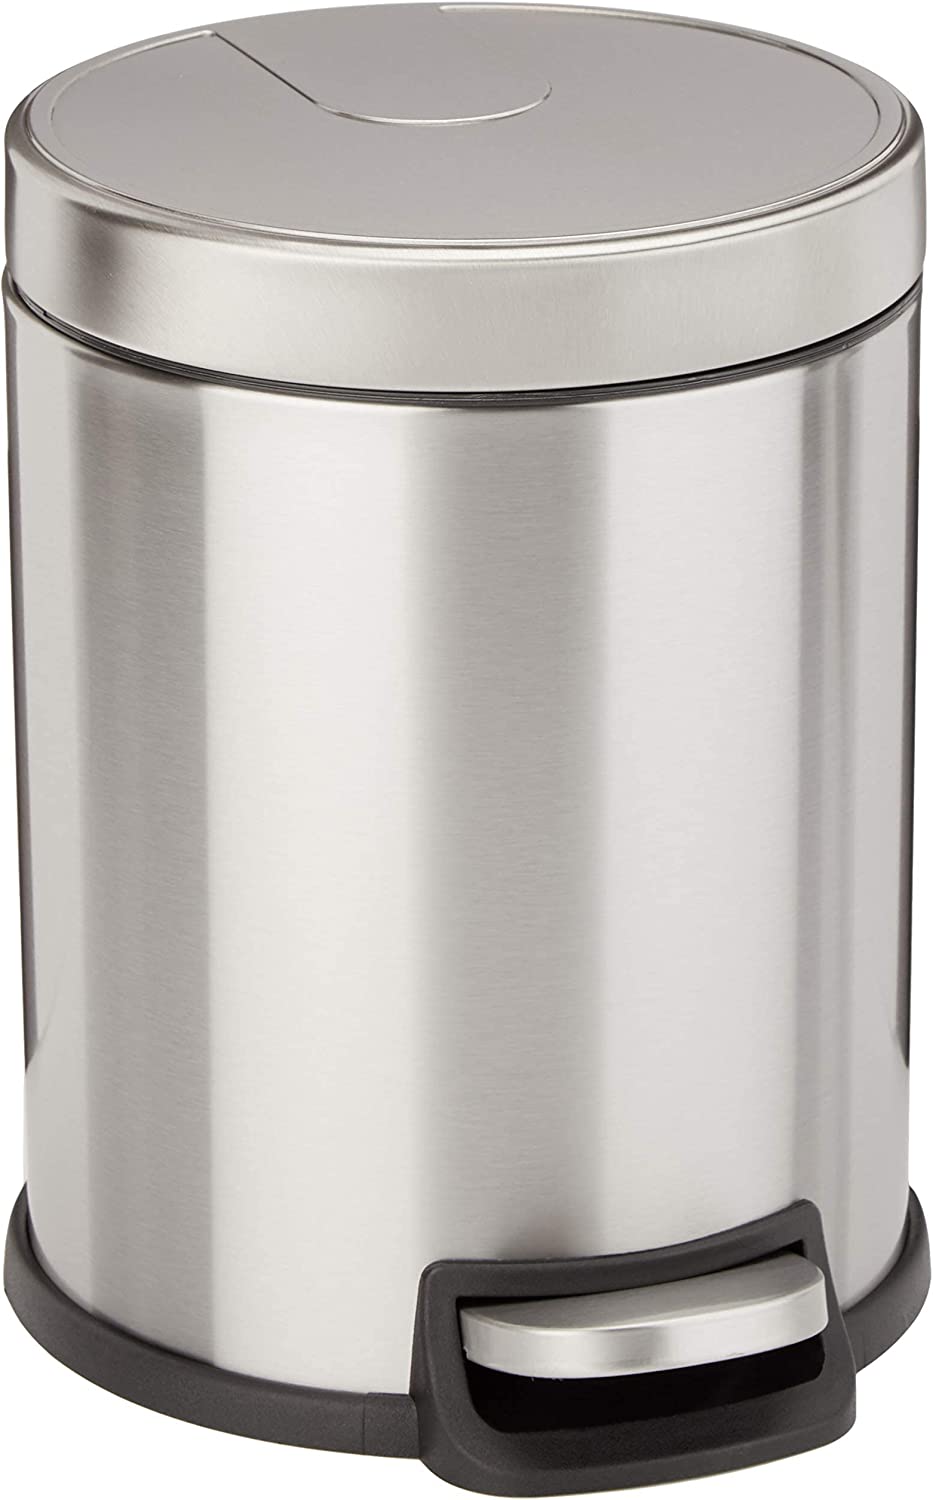 Amazon Basics Round Cylindrical Soft-Close Trash Can with Foot Pedal